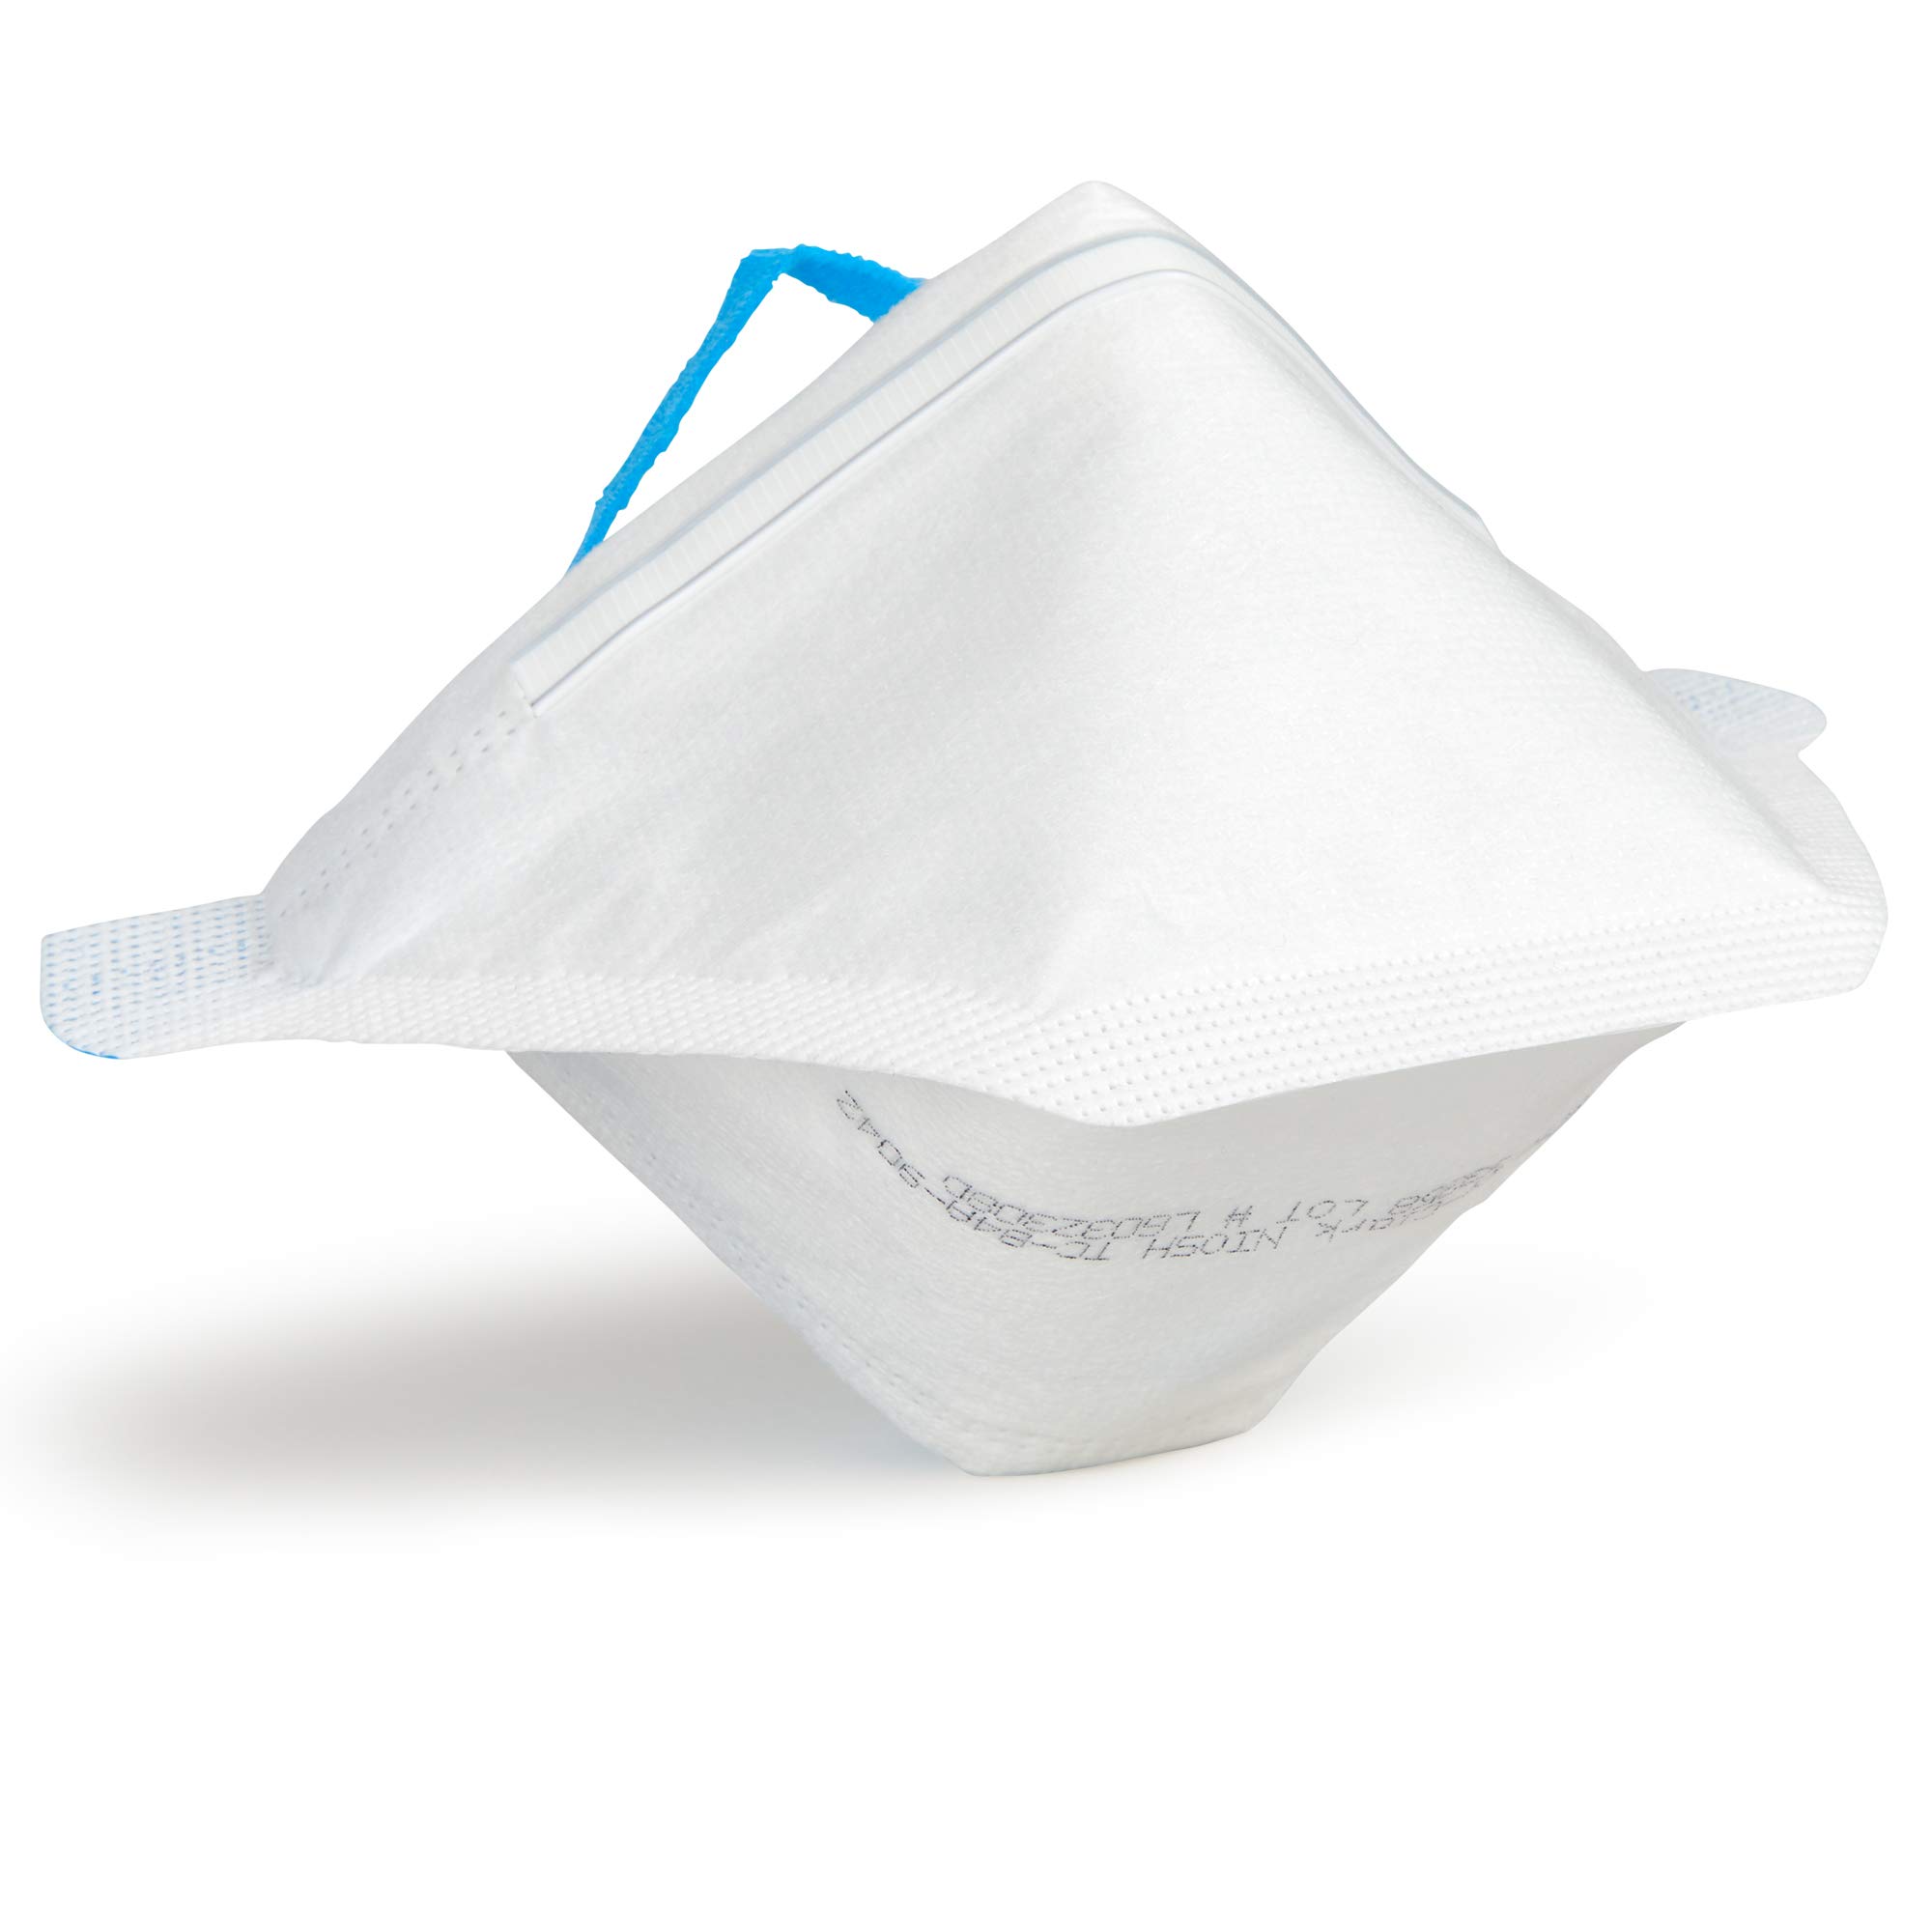 Kimberly-Clark N95 Pouch Respirator 53358 NIOSH Made in U.S.A. 50 for $24.99 FS Amazon Prime